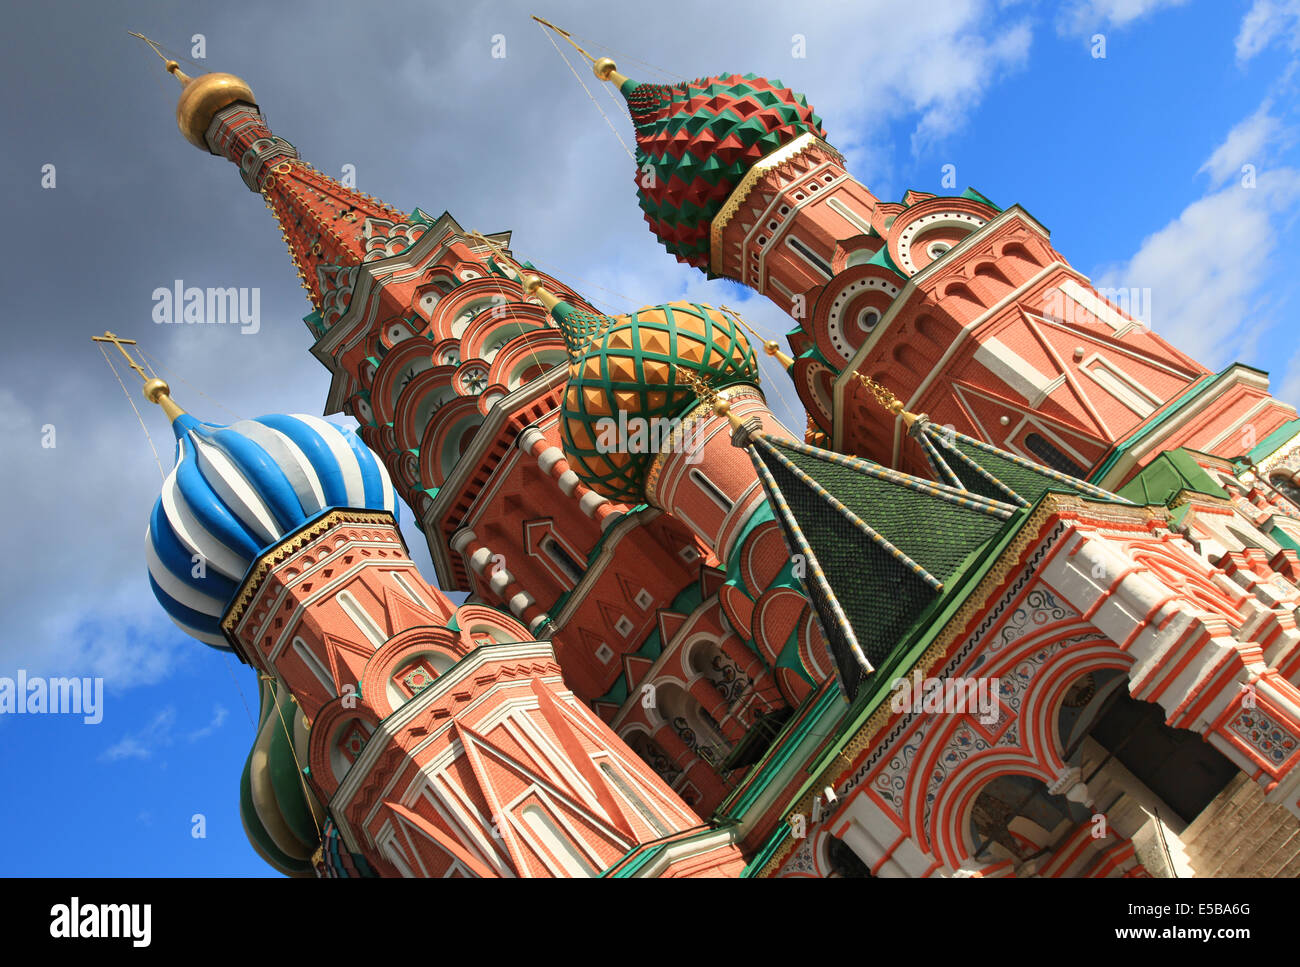 Saint Basil's cathedral with unique architecture and colorful onion shaped domes on Red Square in Moscow Russia Stock Photo